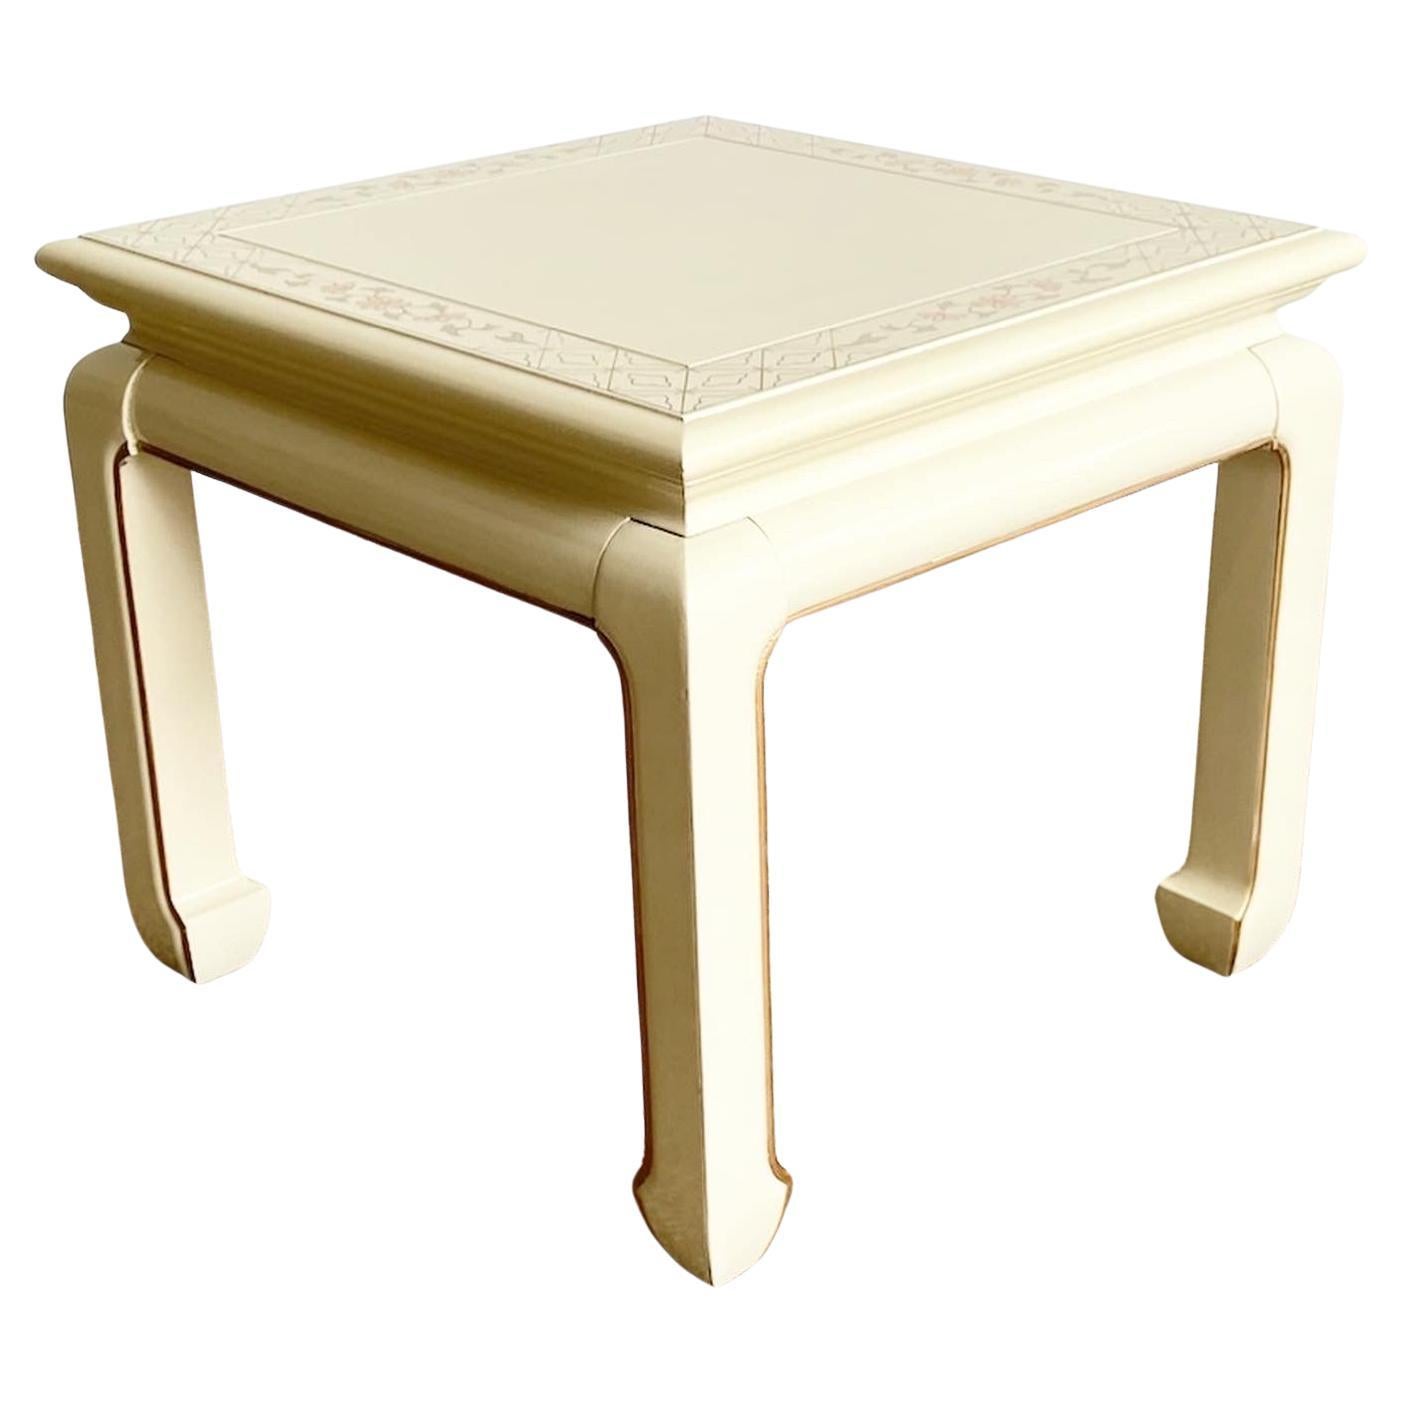 Vintage Chinese Cream Lacquered Hand Painted Side Table